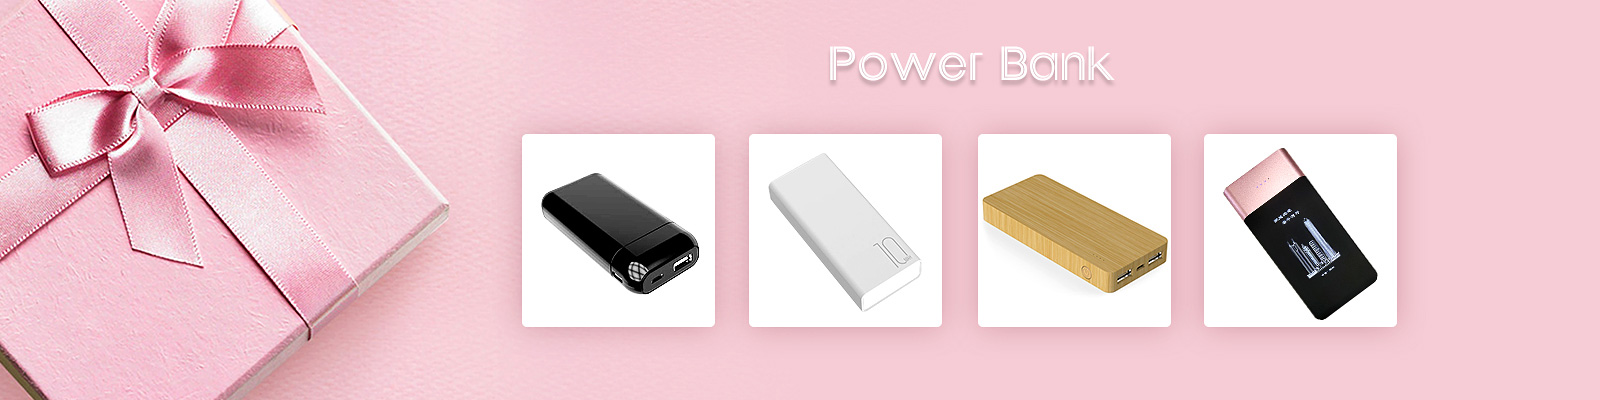 Metal power bank | best portable battery charger | leadway group limited